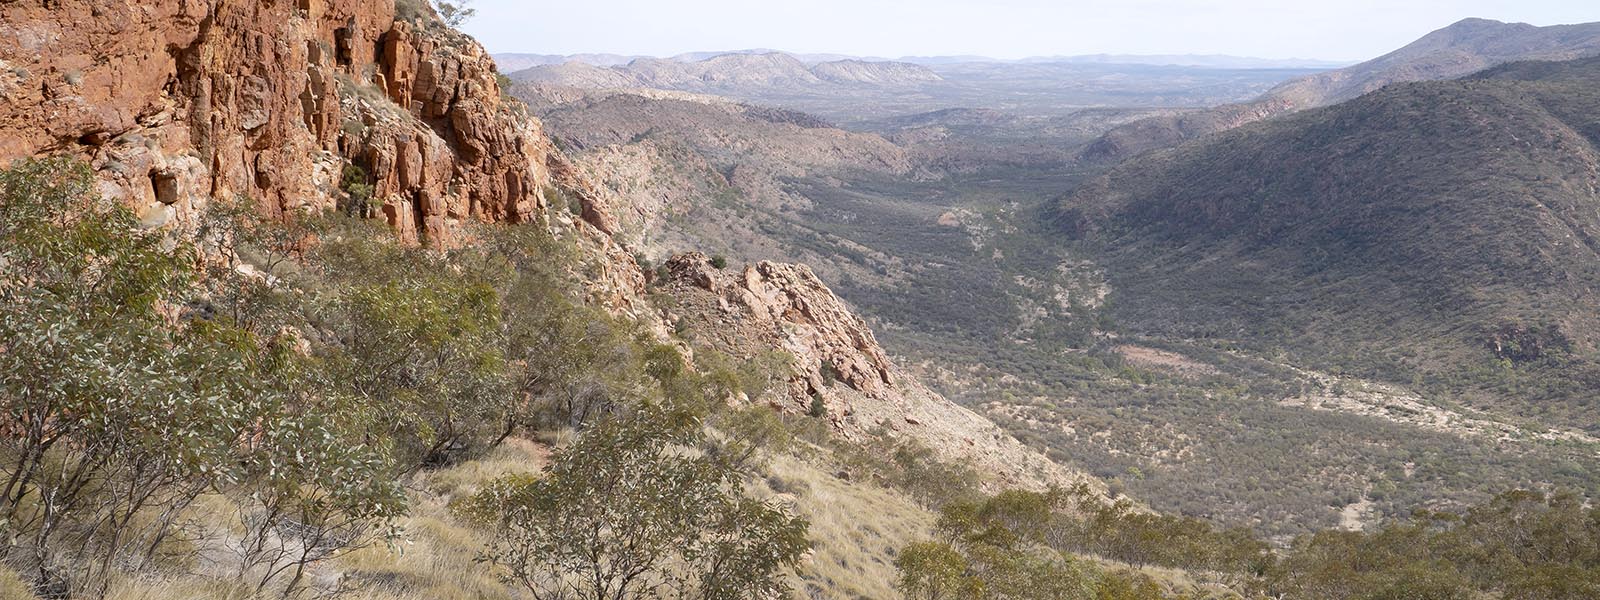 View into a desert valley somewhere along the Larapinta Trail in the Northern Territory of Australia.